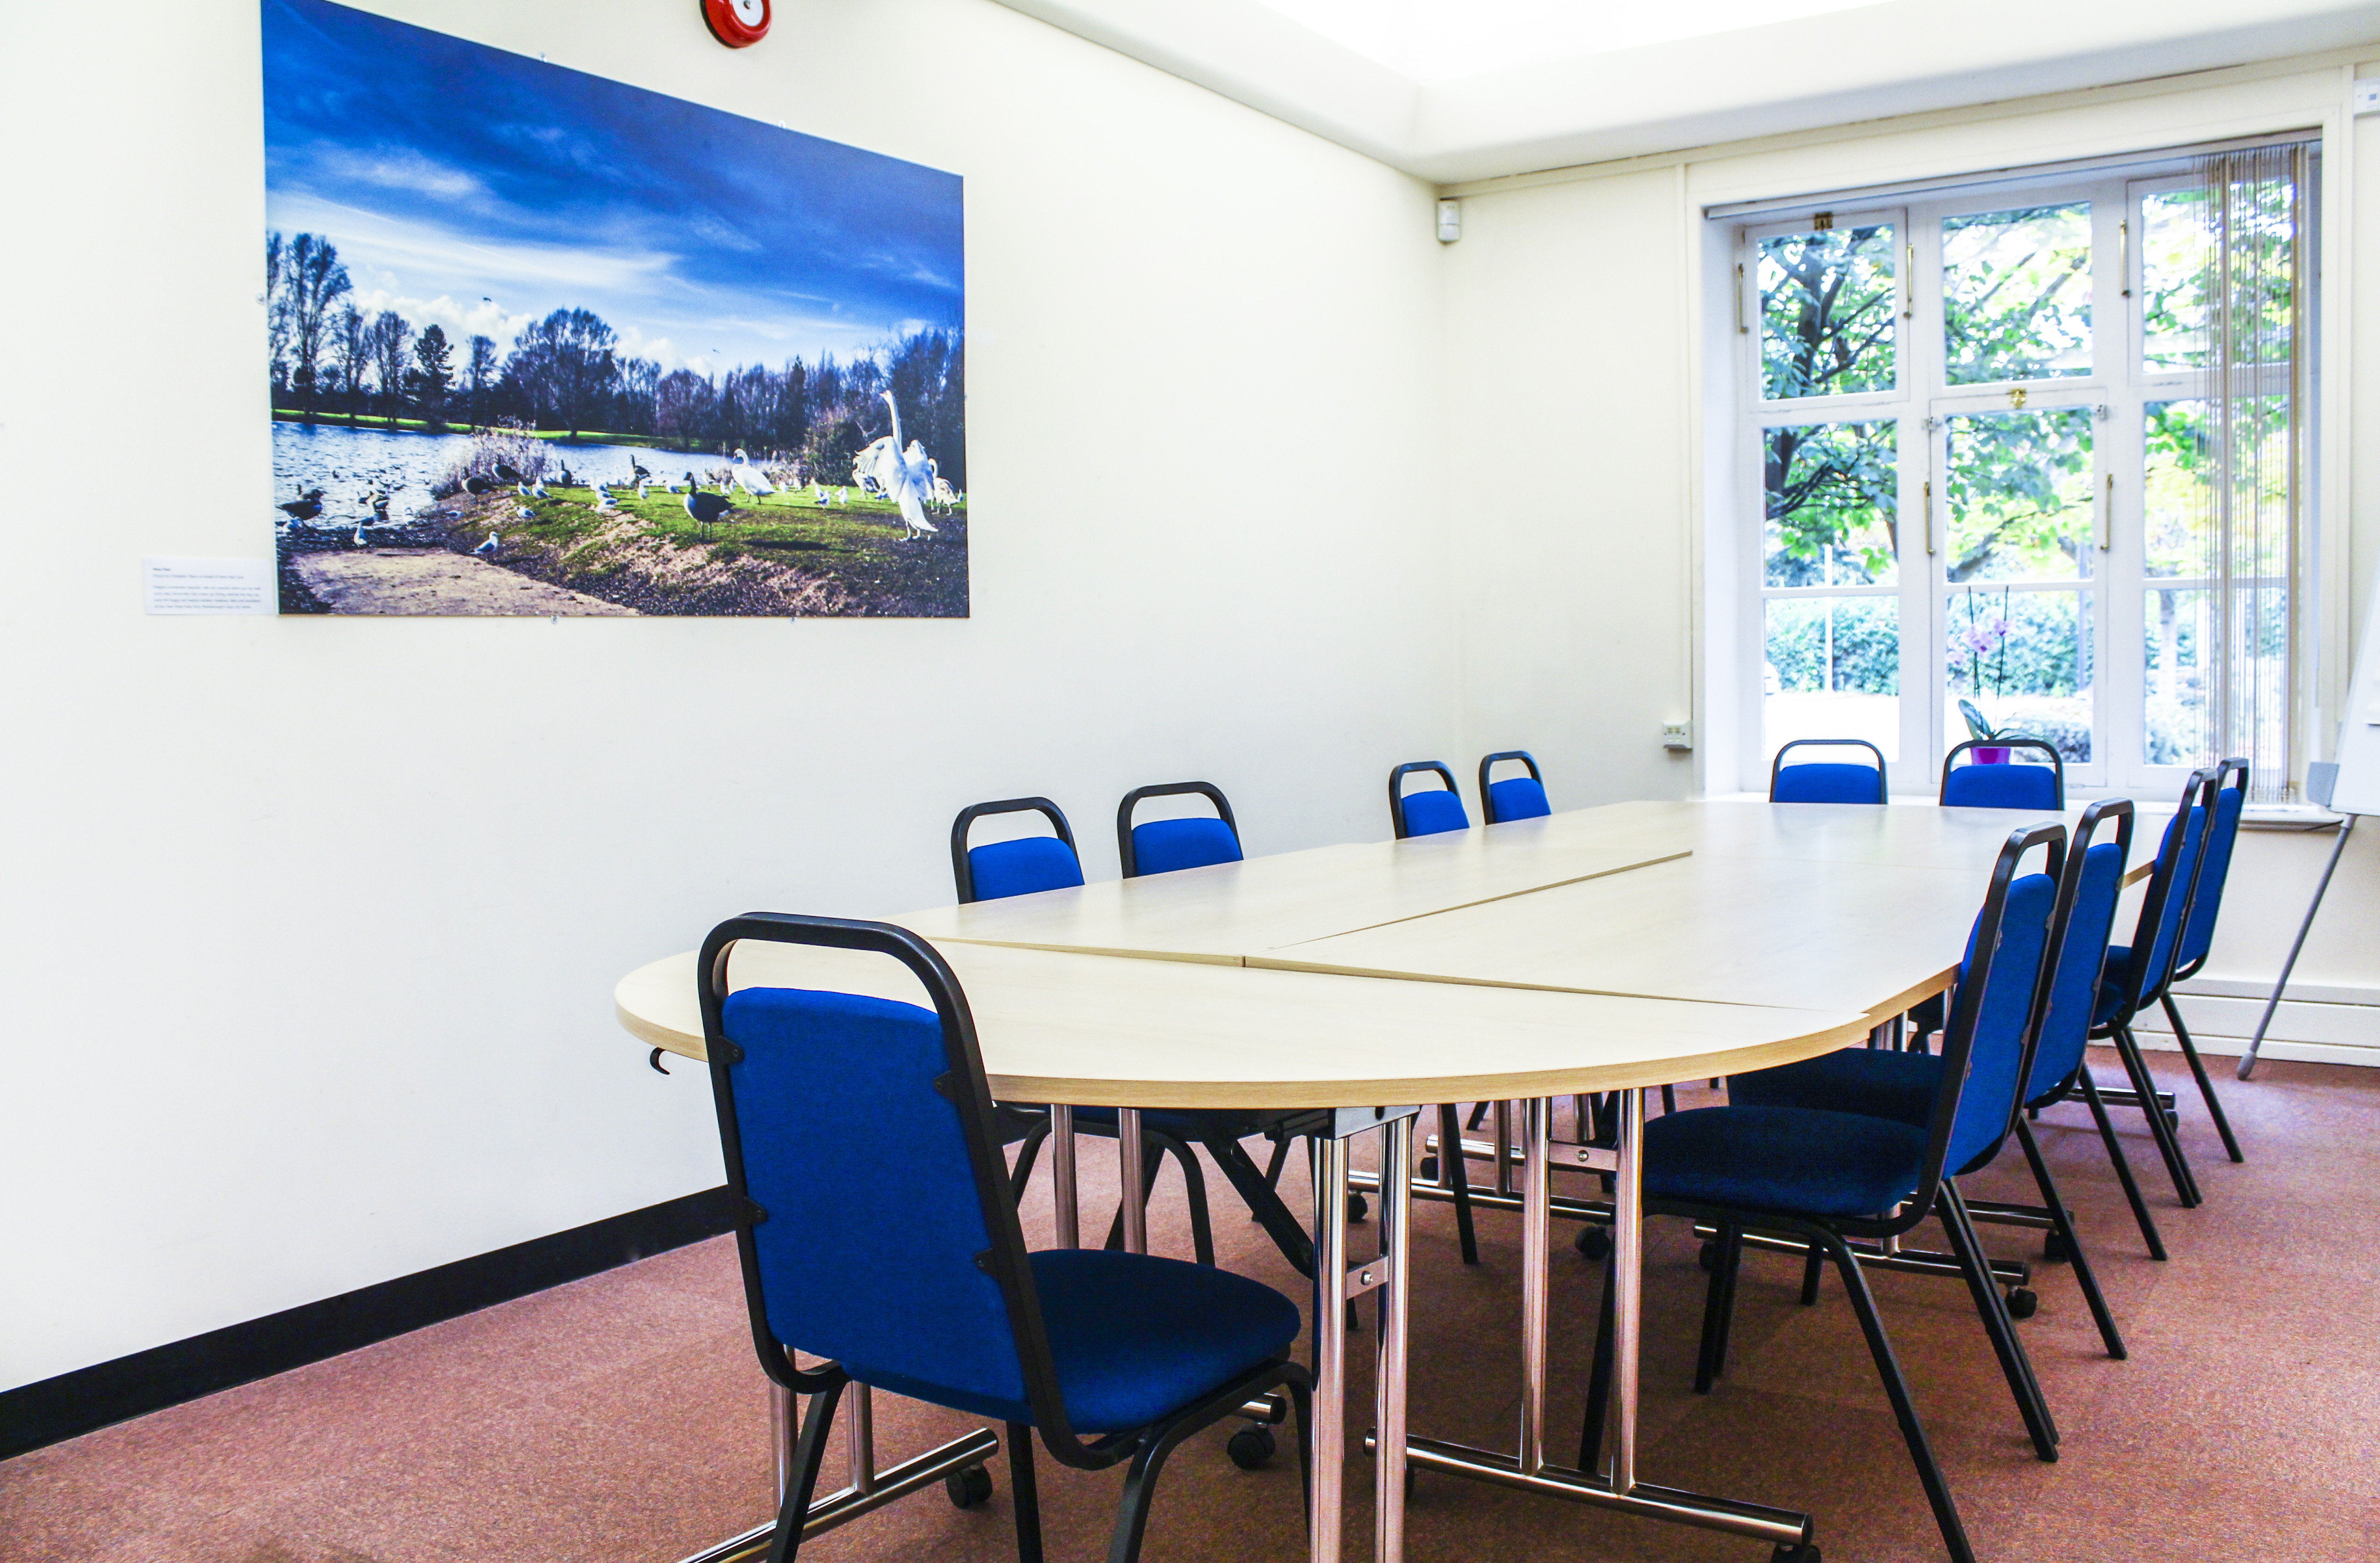 New Park Meeting Room in Peterborough for up to 14 people.